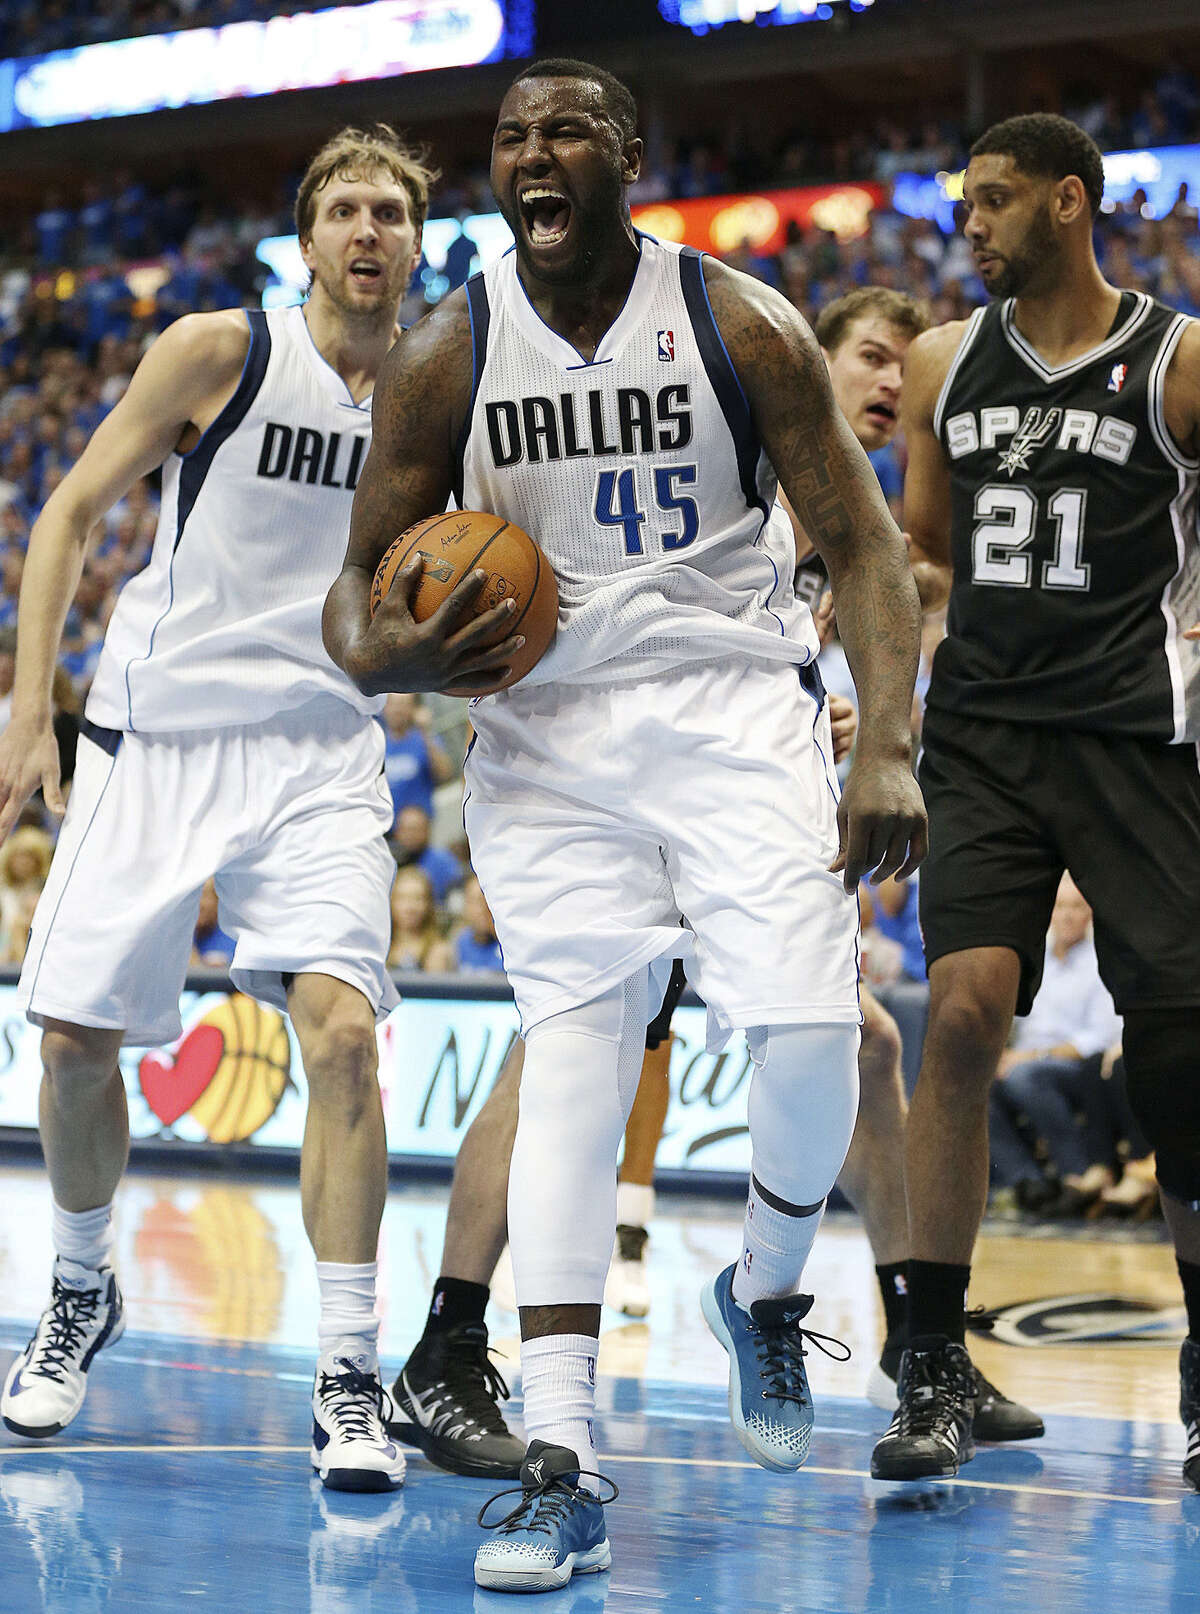 Ex-Spur DeJuan Blair (45) returned from a one-game suspension to score 10 points and grab a game-high 14 rebounds for Dallas. Dirk Nowitzki (left) finished with 22 points, while Tim Duncan had 16 points.